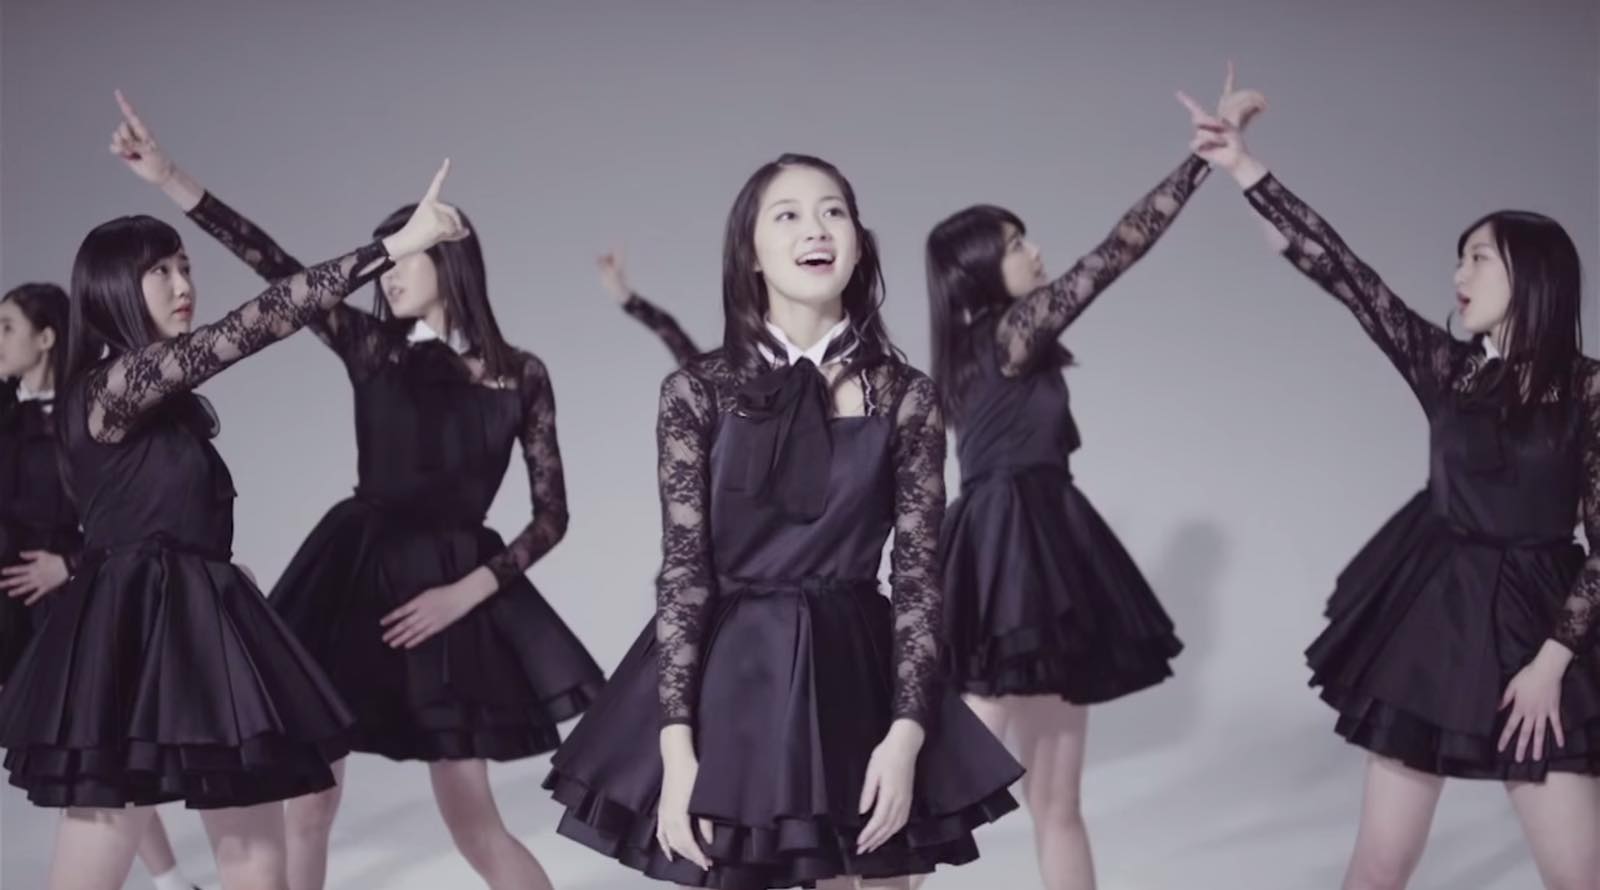 X21 Reveal MV for “Shojo X”, the Lead Track From their 1st Album!